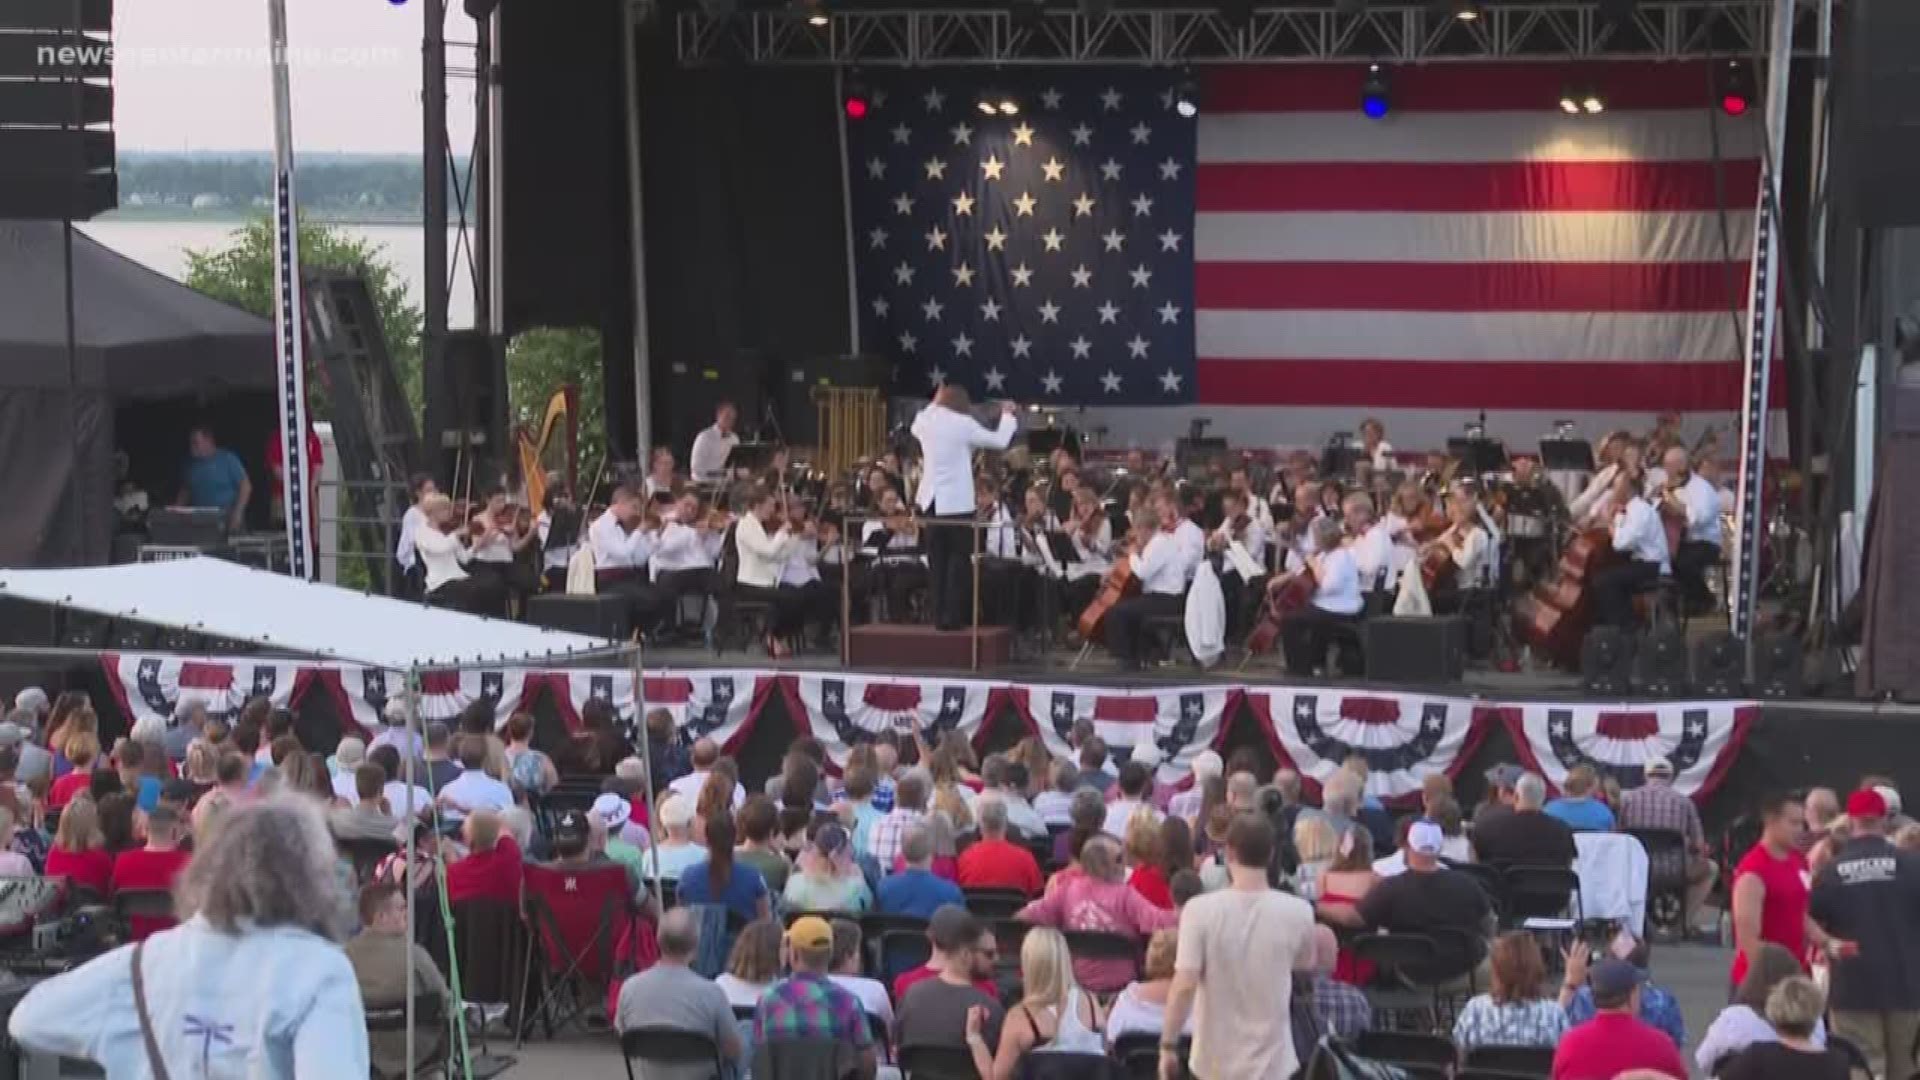 People from near and far came to Portland Thursday to celebrate Independence Day with the Portland Pops.